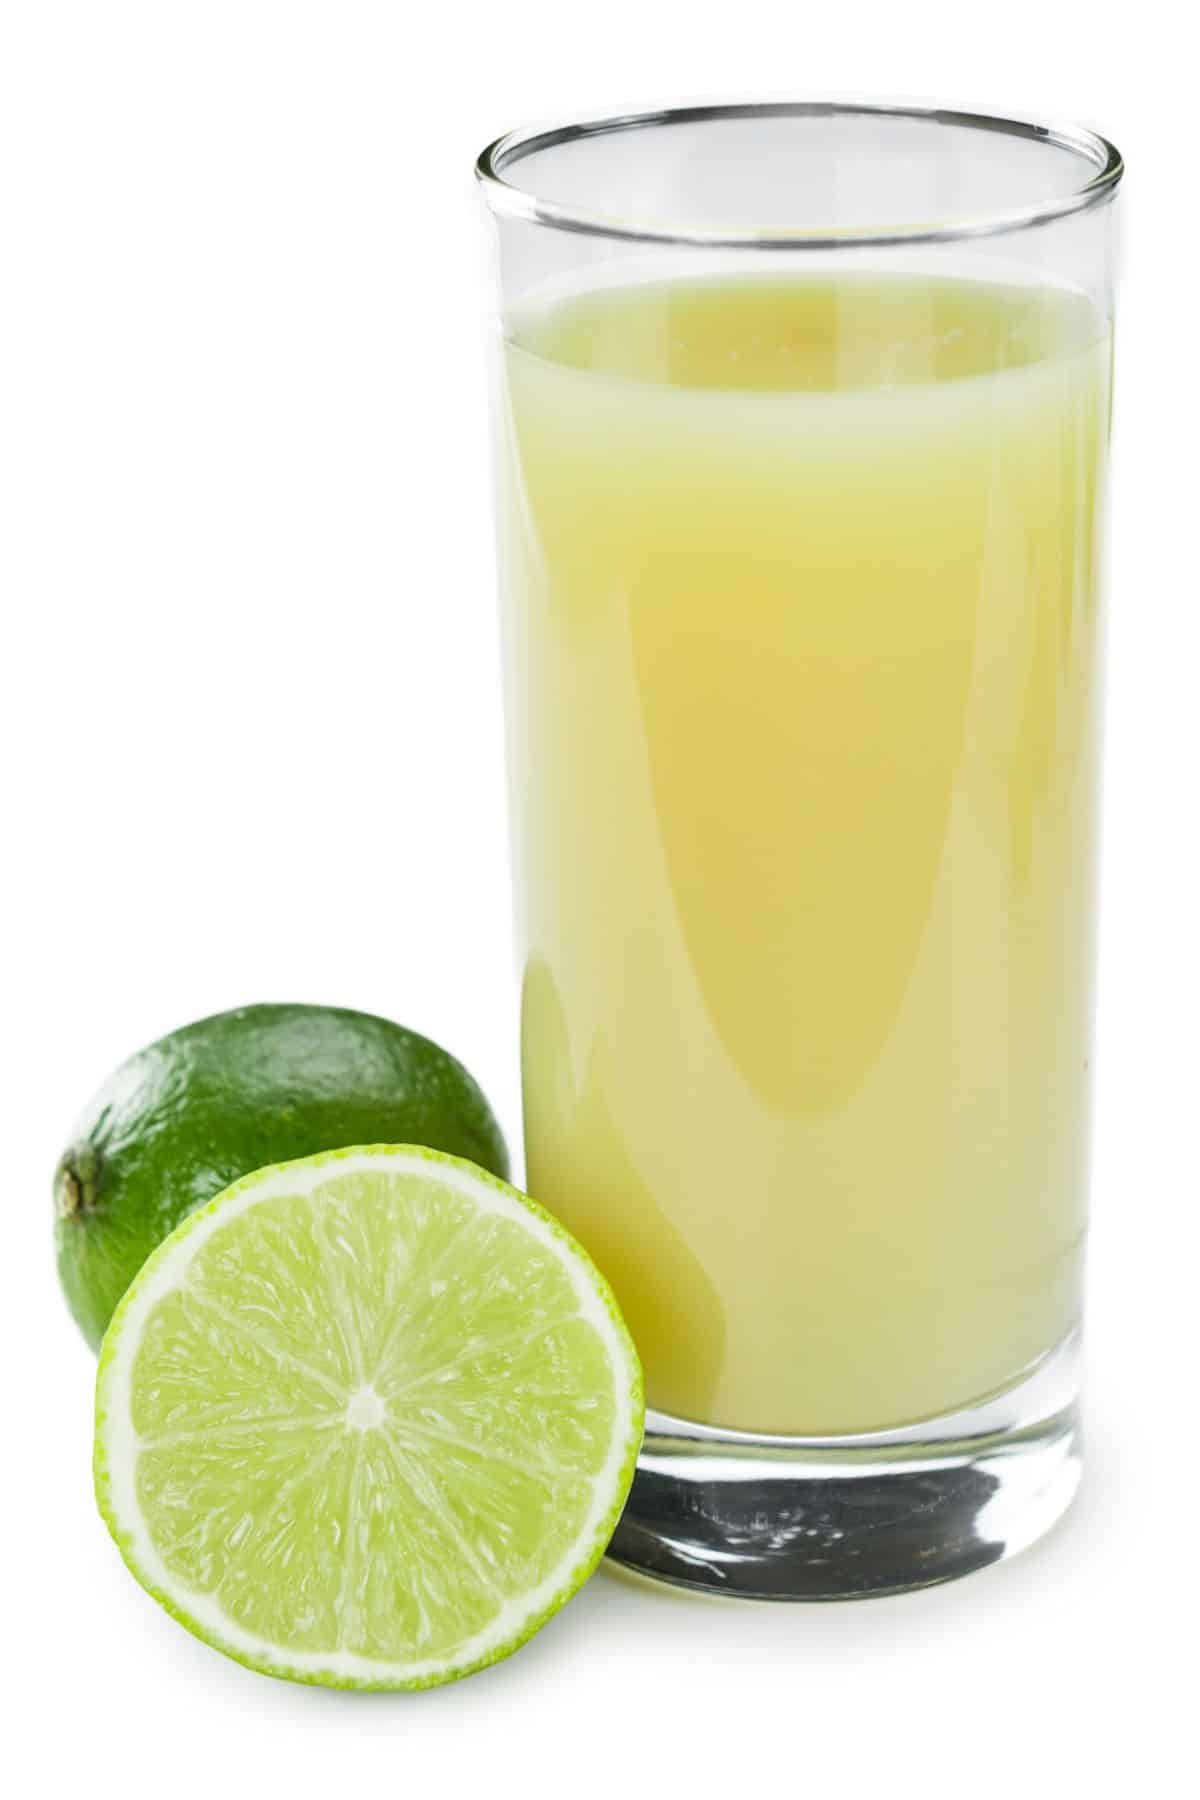 Lime juice in a glass on a white background.